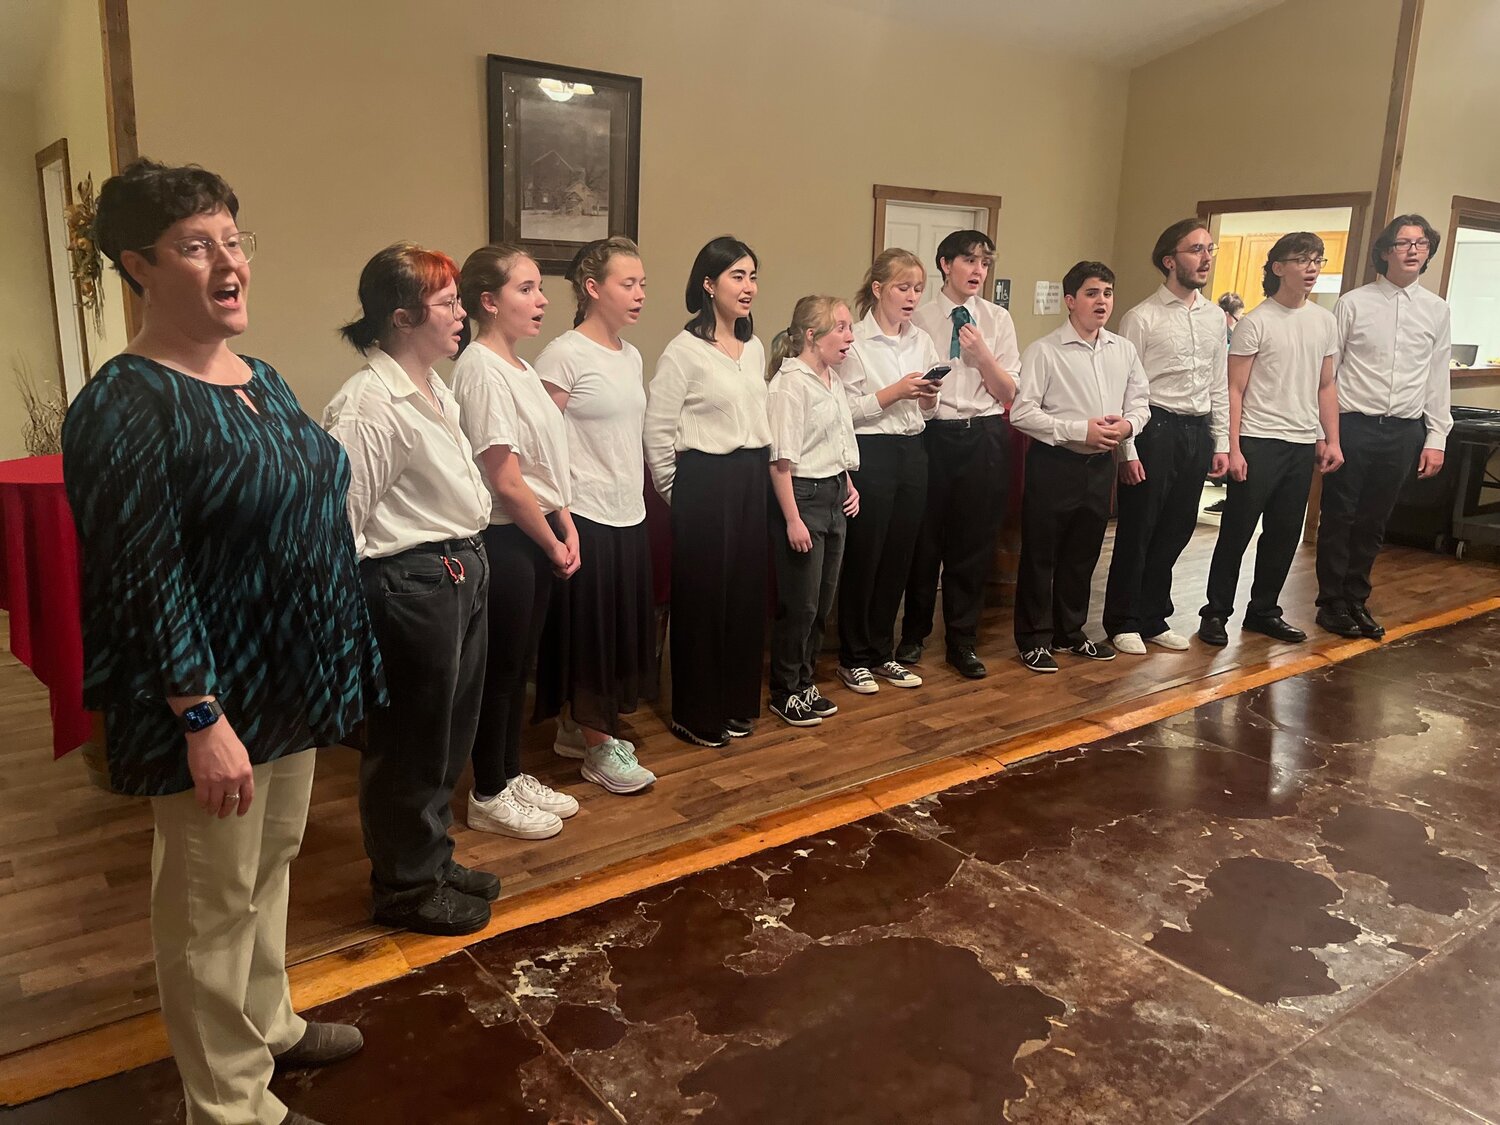 The Mid-Prairie high school choir, directed by vocal director Collette McClellen, left, sang at the end of the Chef Spotlight Fundraiser Dinner.  Students shown here: Toby Olson, Georgia White, Phoebe Shetler, Faziia Kasymova, Jillian Clark, Wren Harris, Isadora Goode, Logan McClellen, Jimmy Rempel, Lincoln Wulf, and Brock Lowenberg.  Not pictured: Kali Miller.